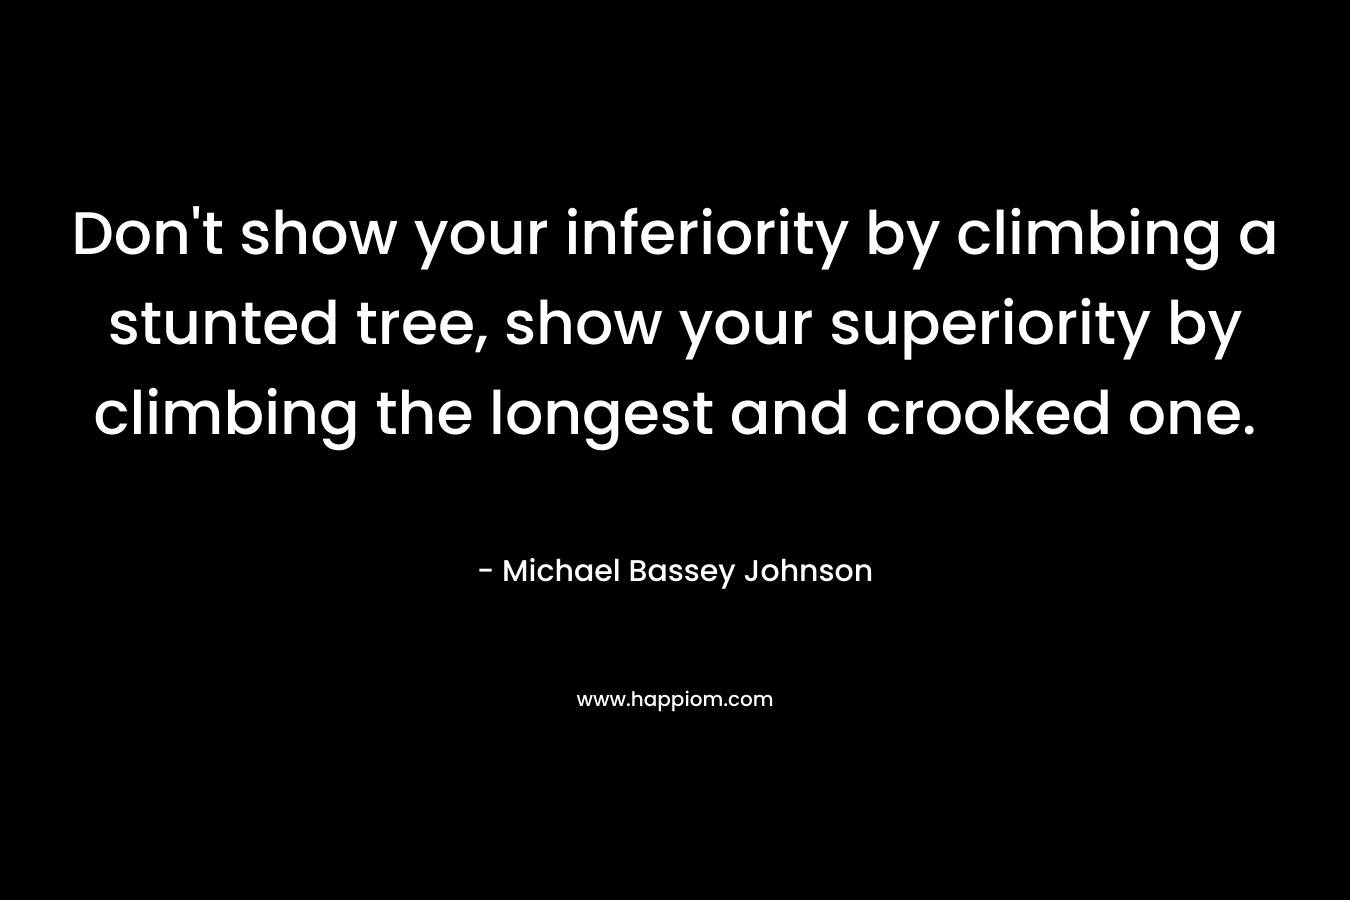 Don't show your inferiority by climbing a stunted tree, show your superiority by climbing the longest and crooked one.